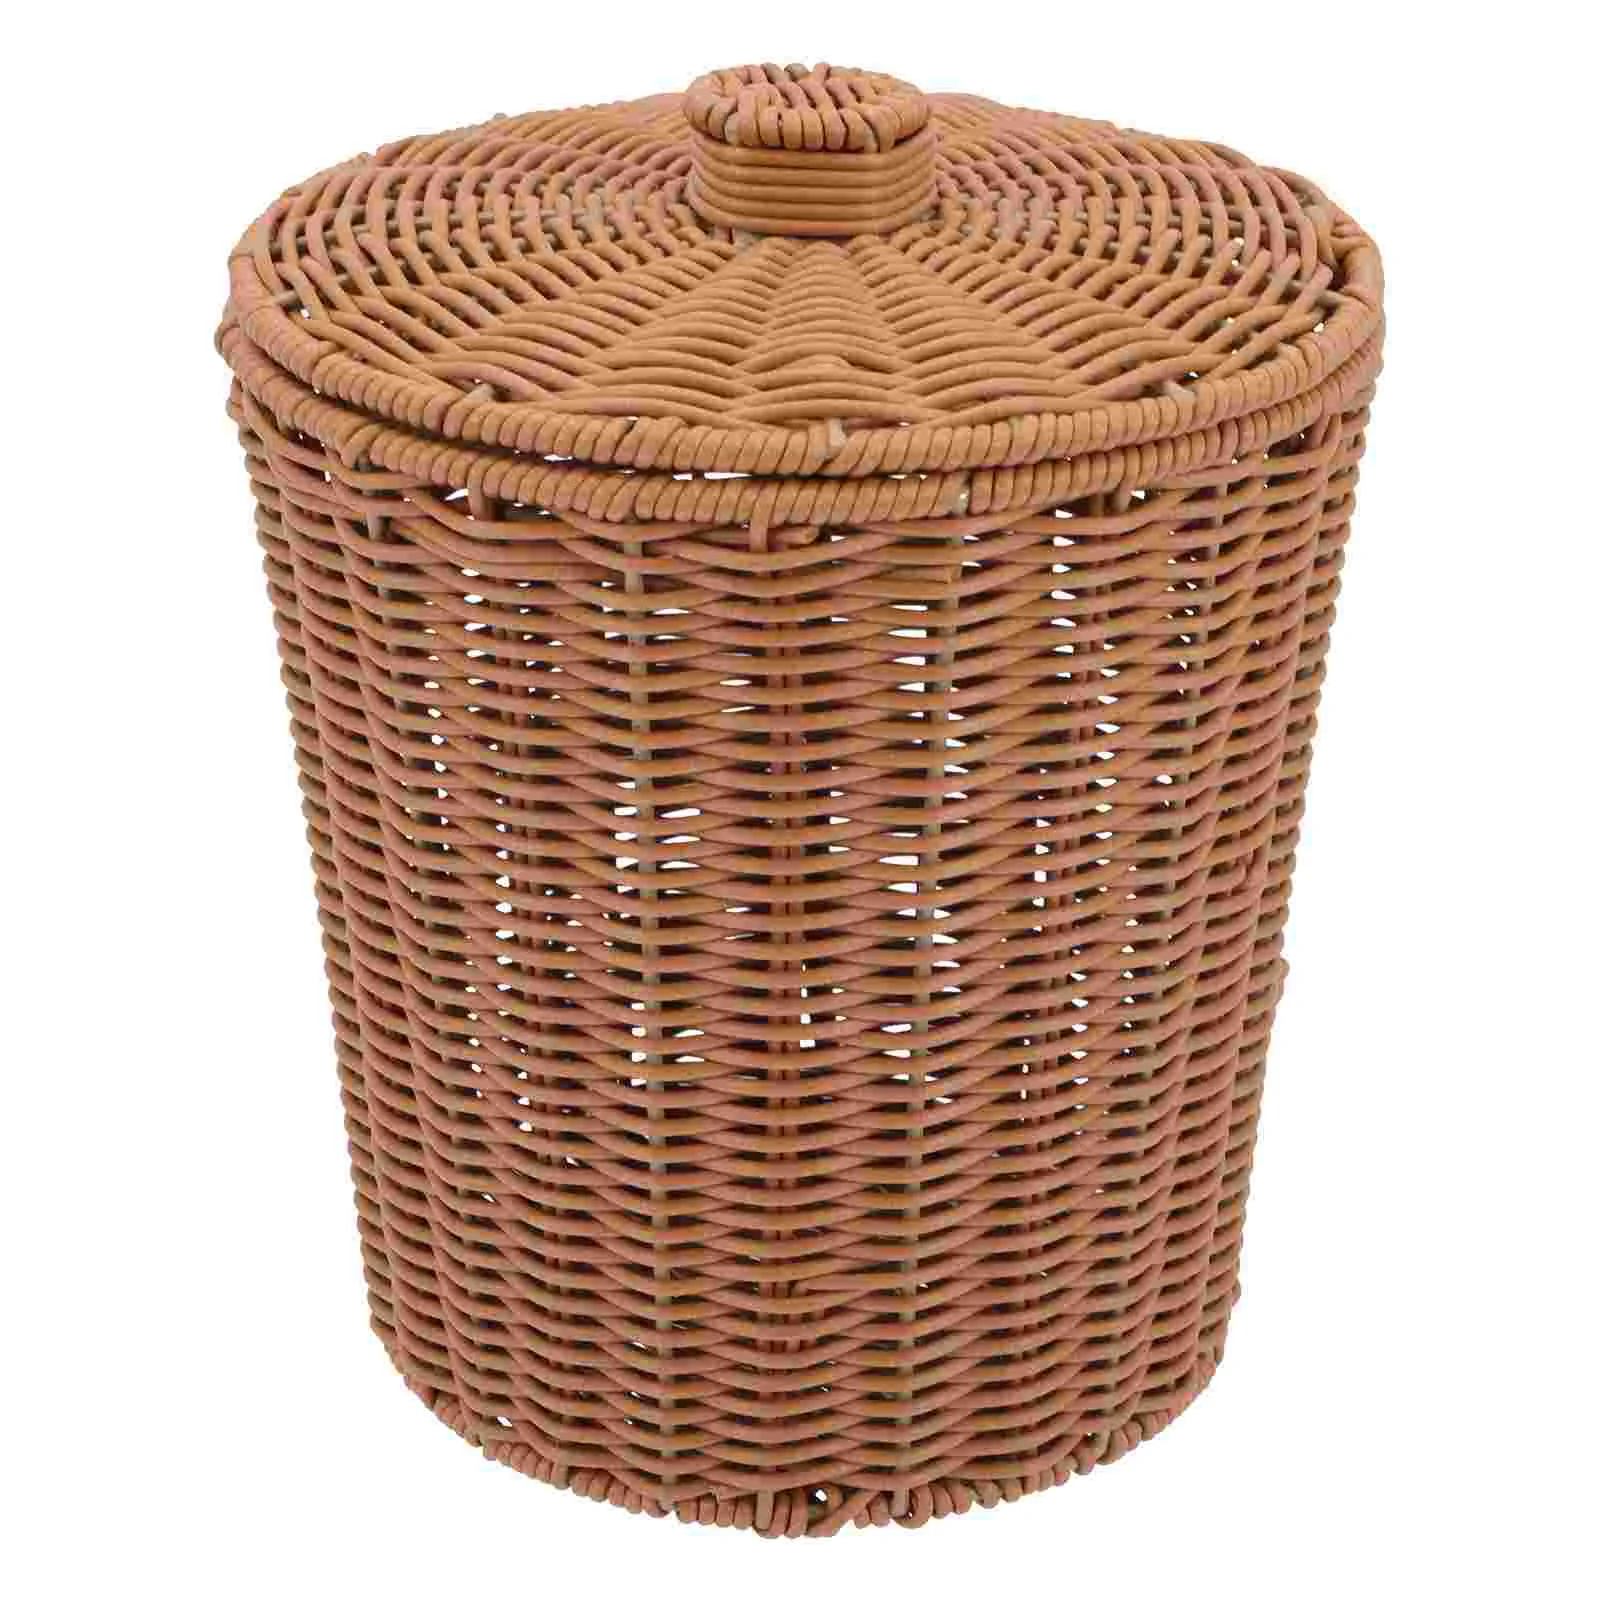 

Basket Trash Storage Waste Woven Can Bin Rattan Laundry Garbage Baskets Wicker Lid Container Round Clothes Office Rubbish Hamper